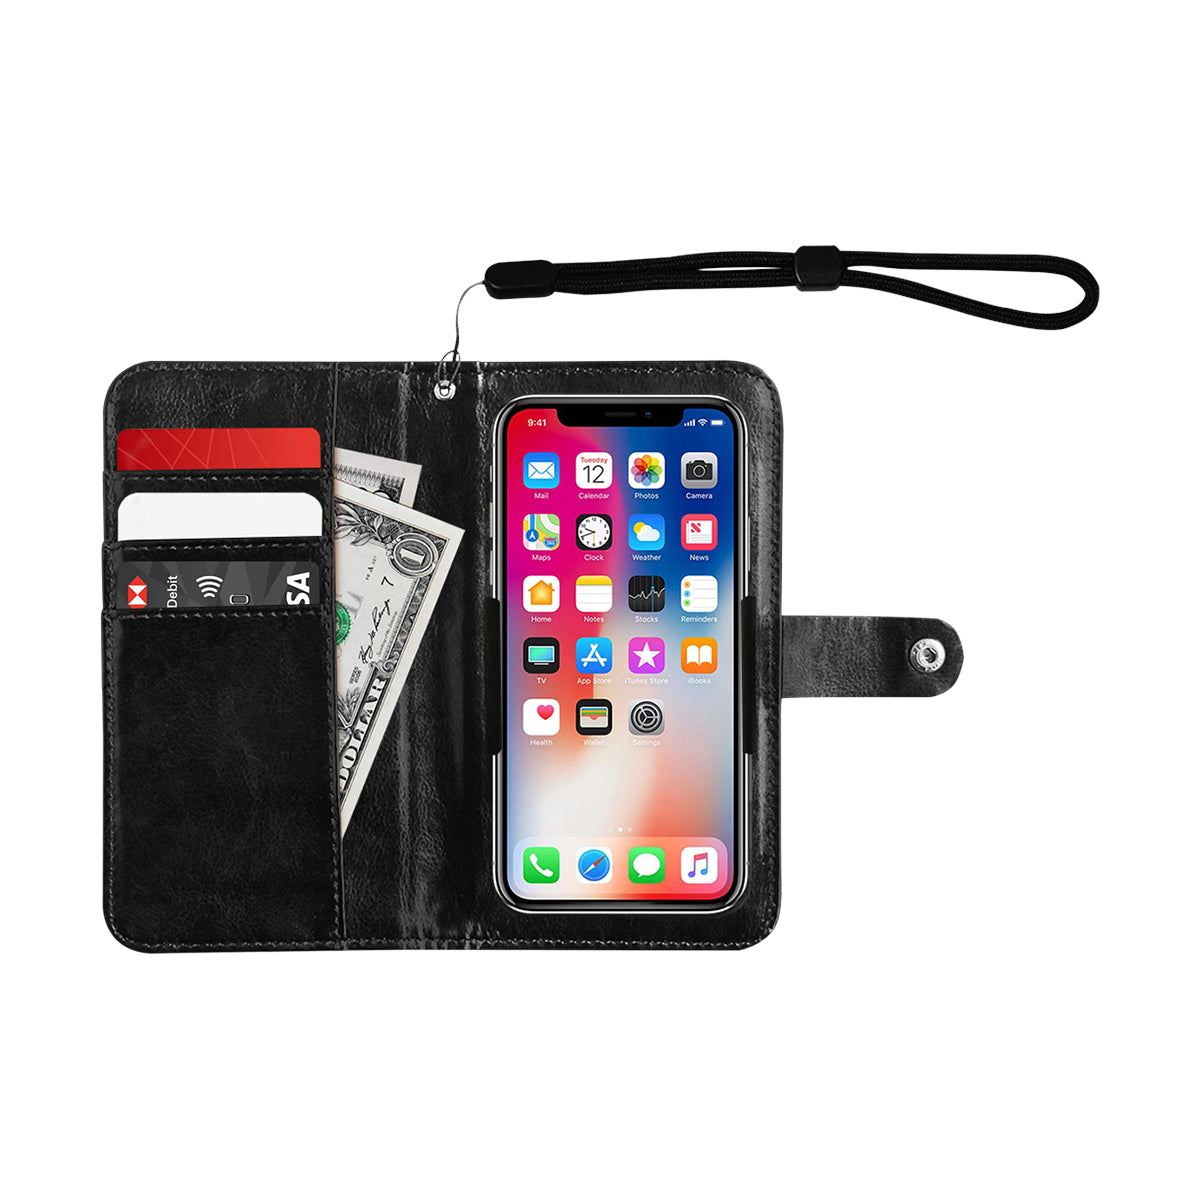 Psychedelic - 2 in 1 Phone Case and Wallet - SMALL